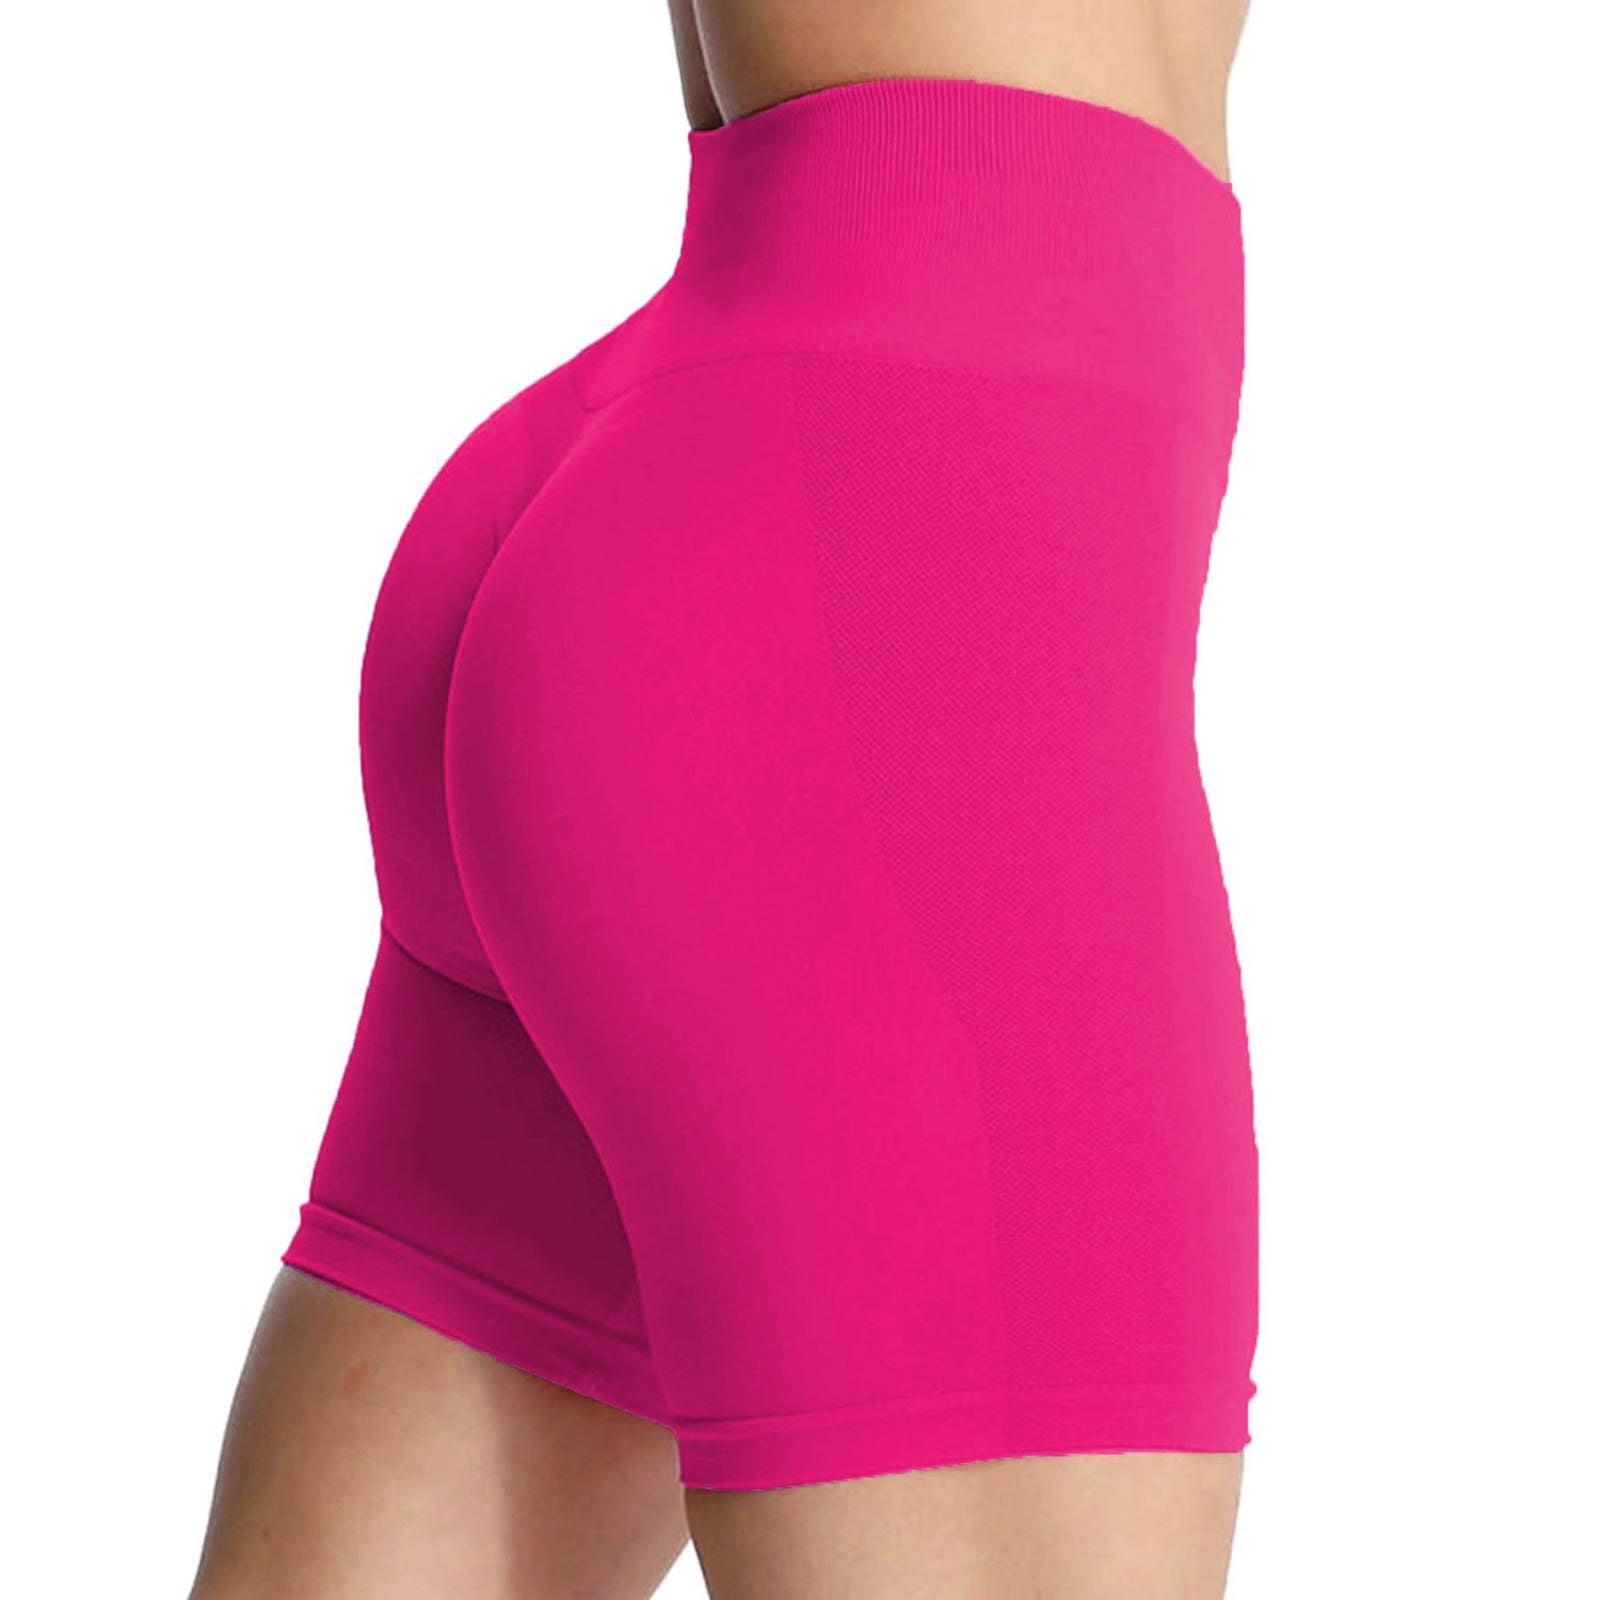 Aoxjox Asset 6" Seamless Scrunch Shorts (Brights)